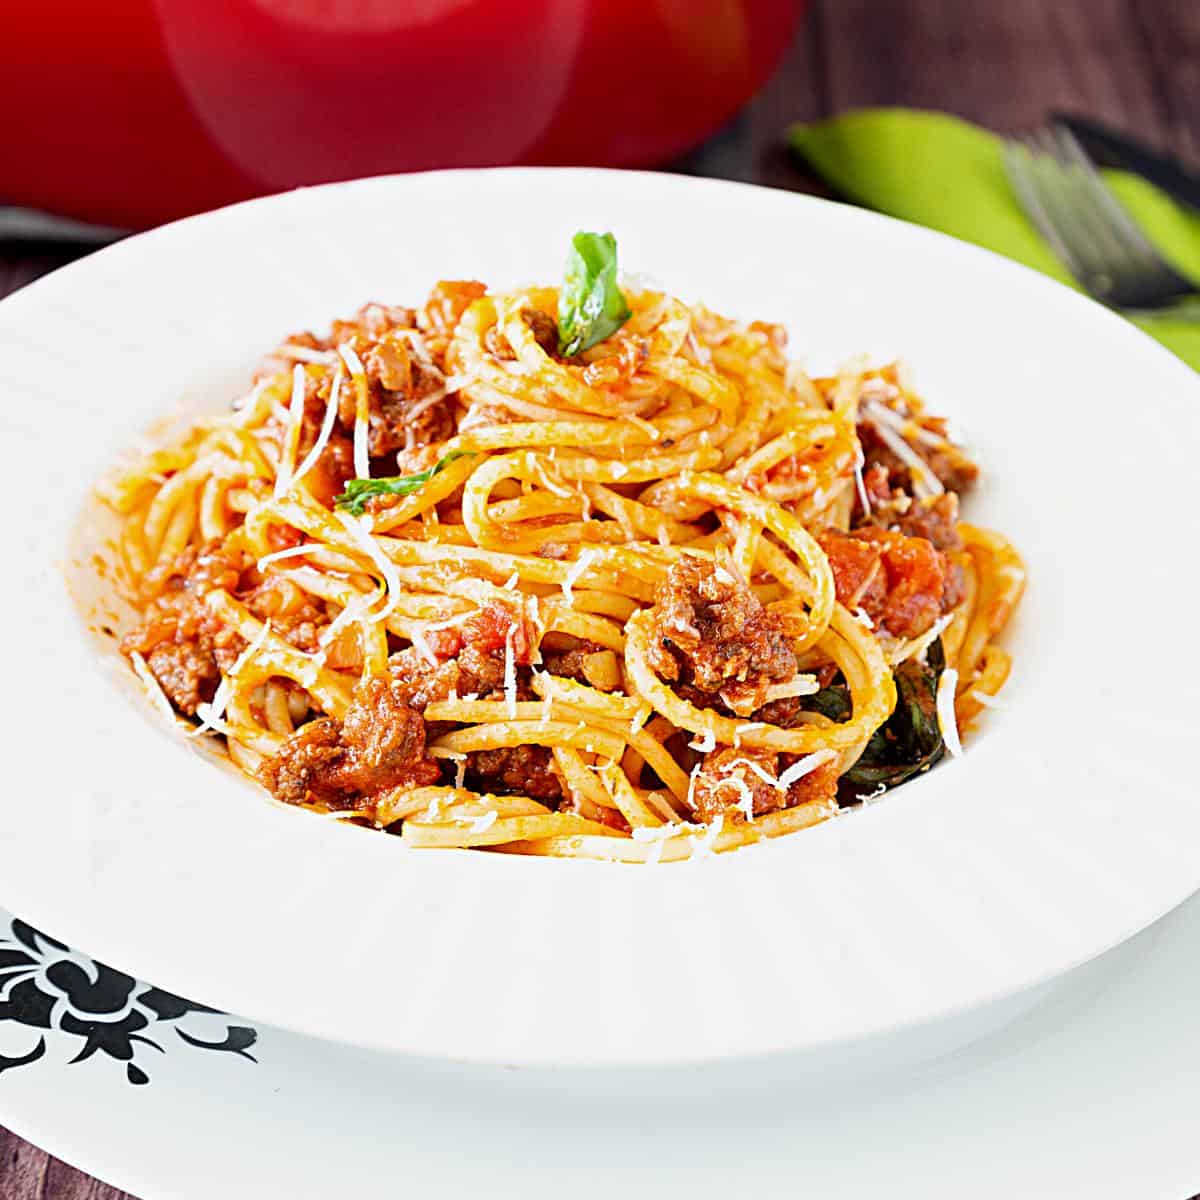 A plate with spaghetti and bolognese.